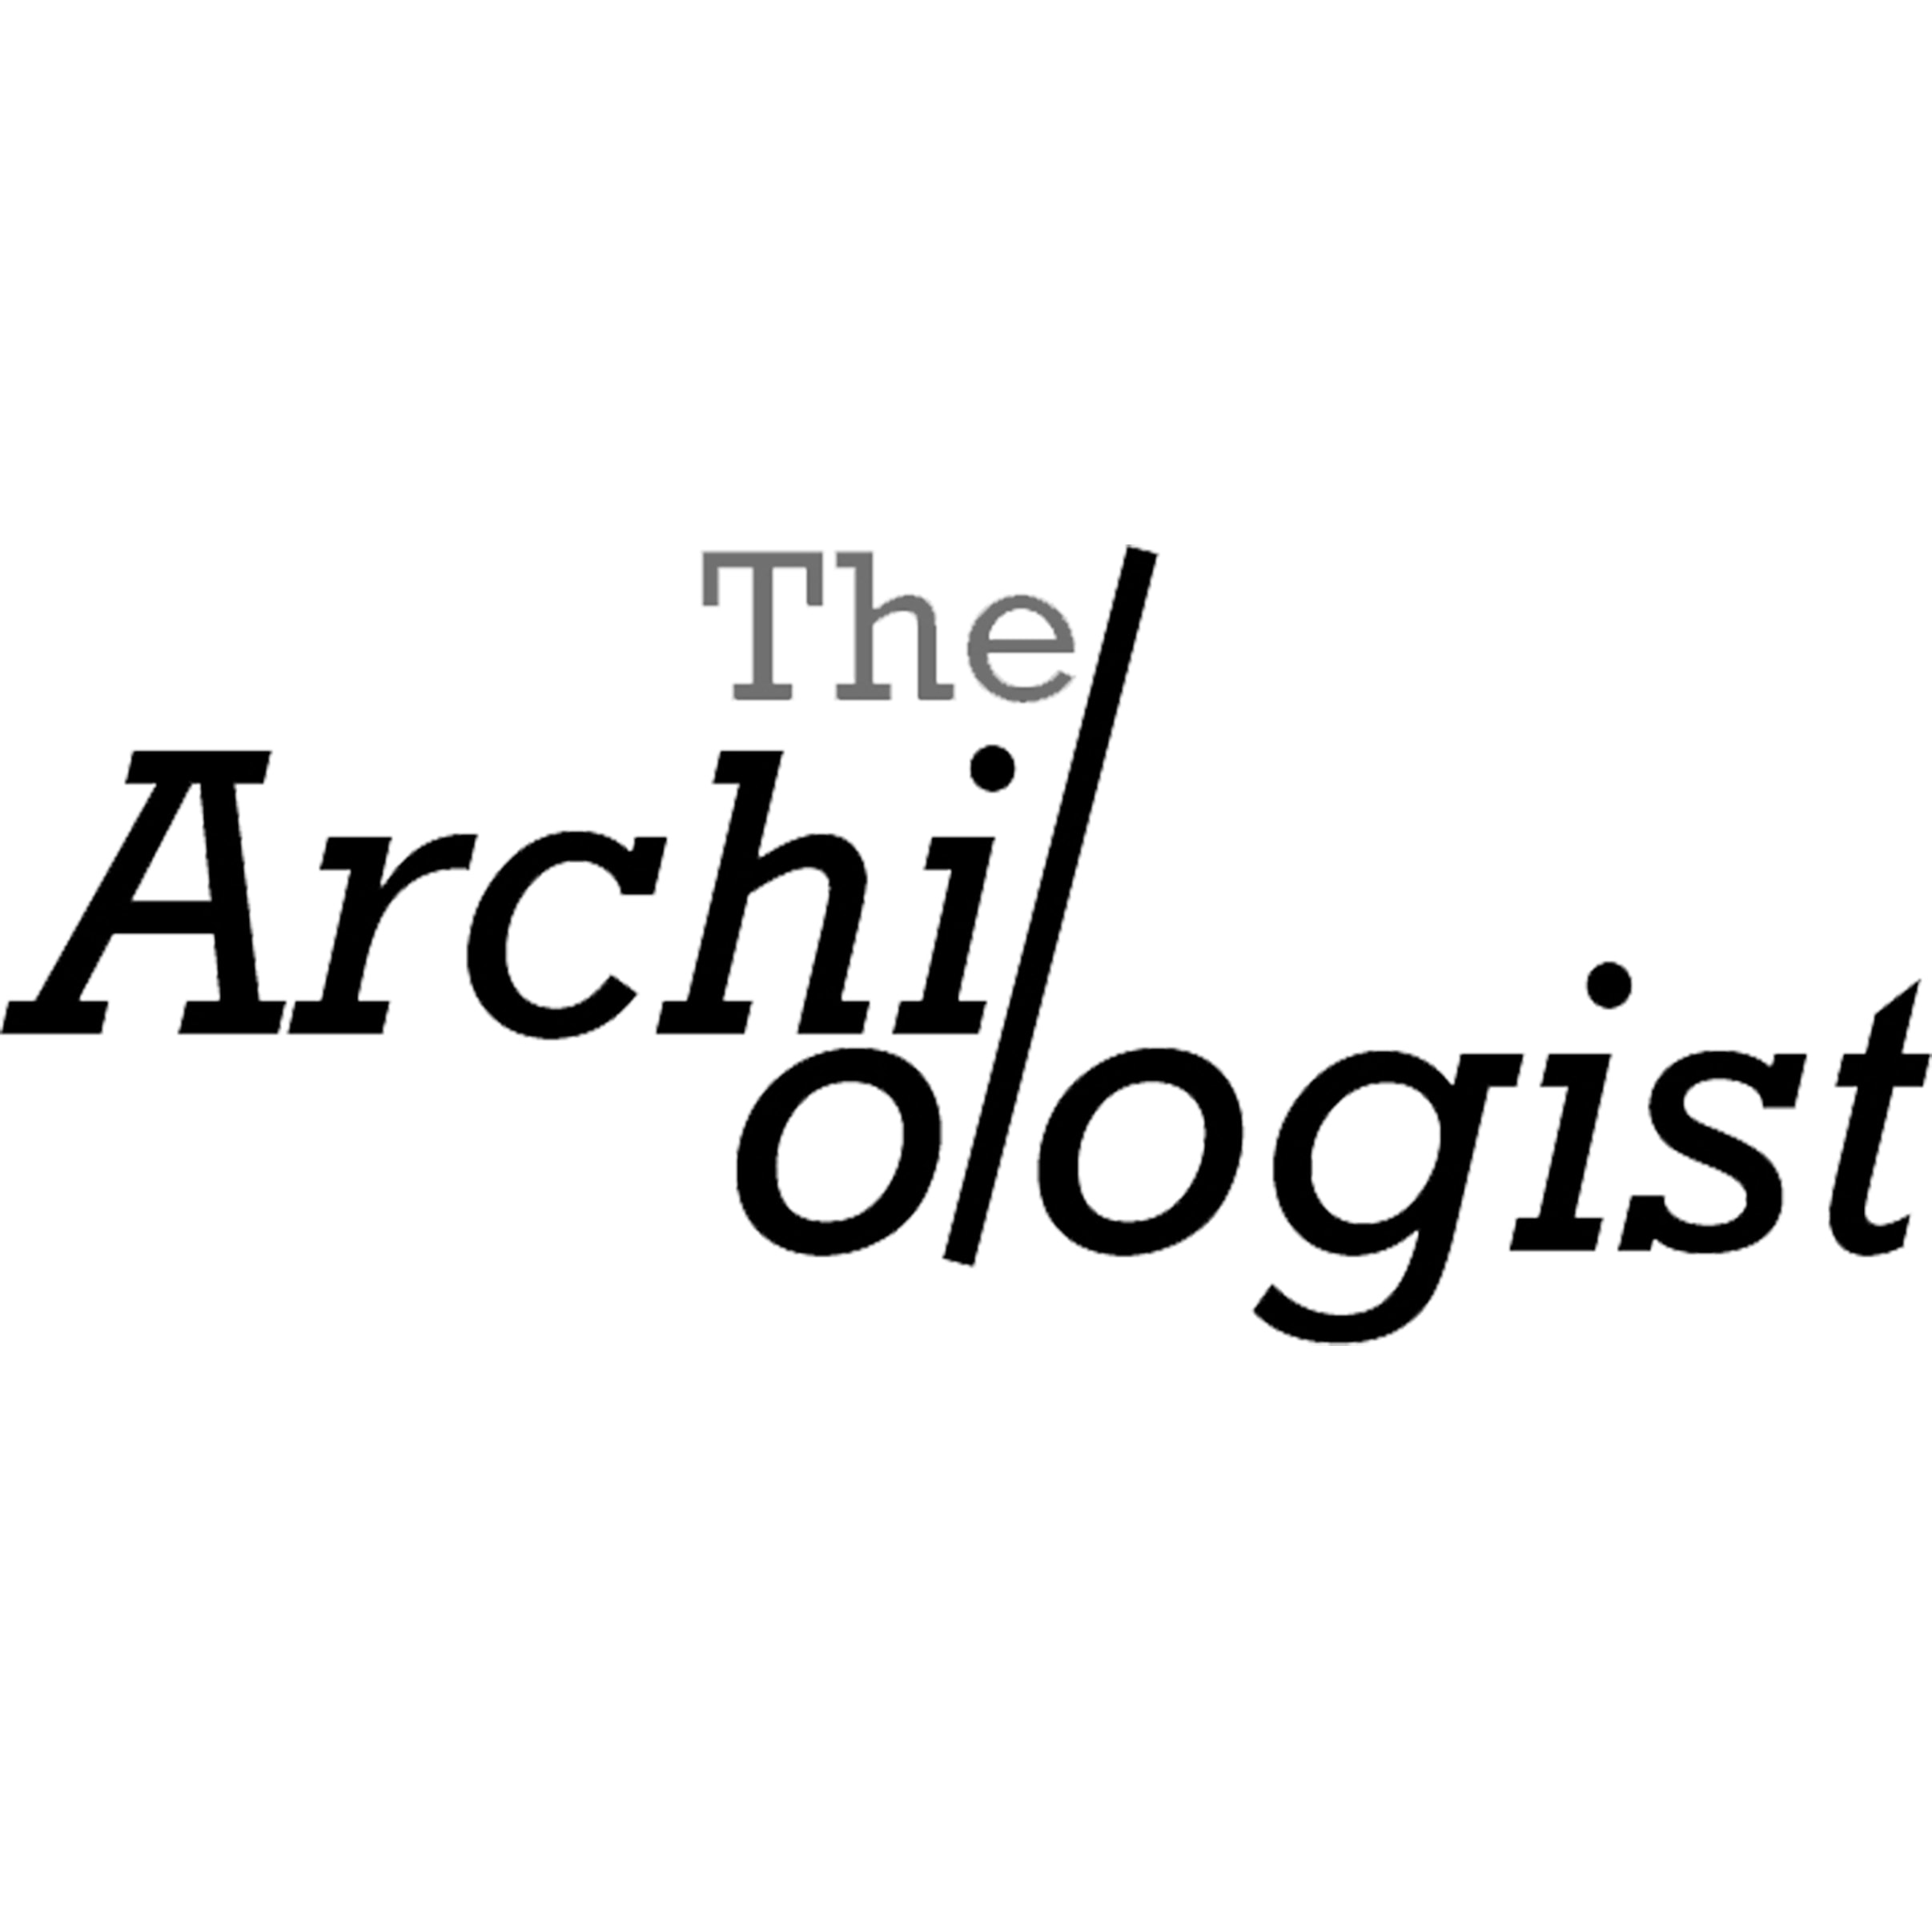 <span style="color: #23e286;">The Archiologist</span>